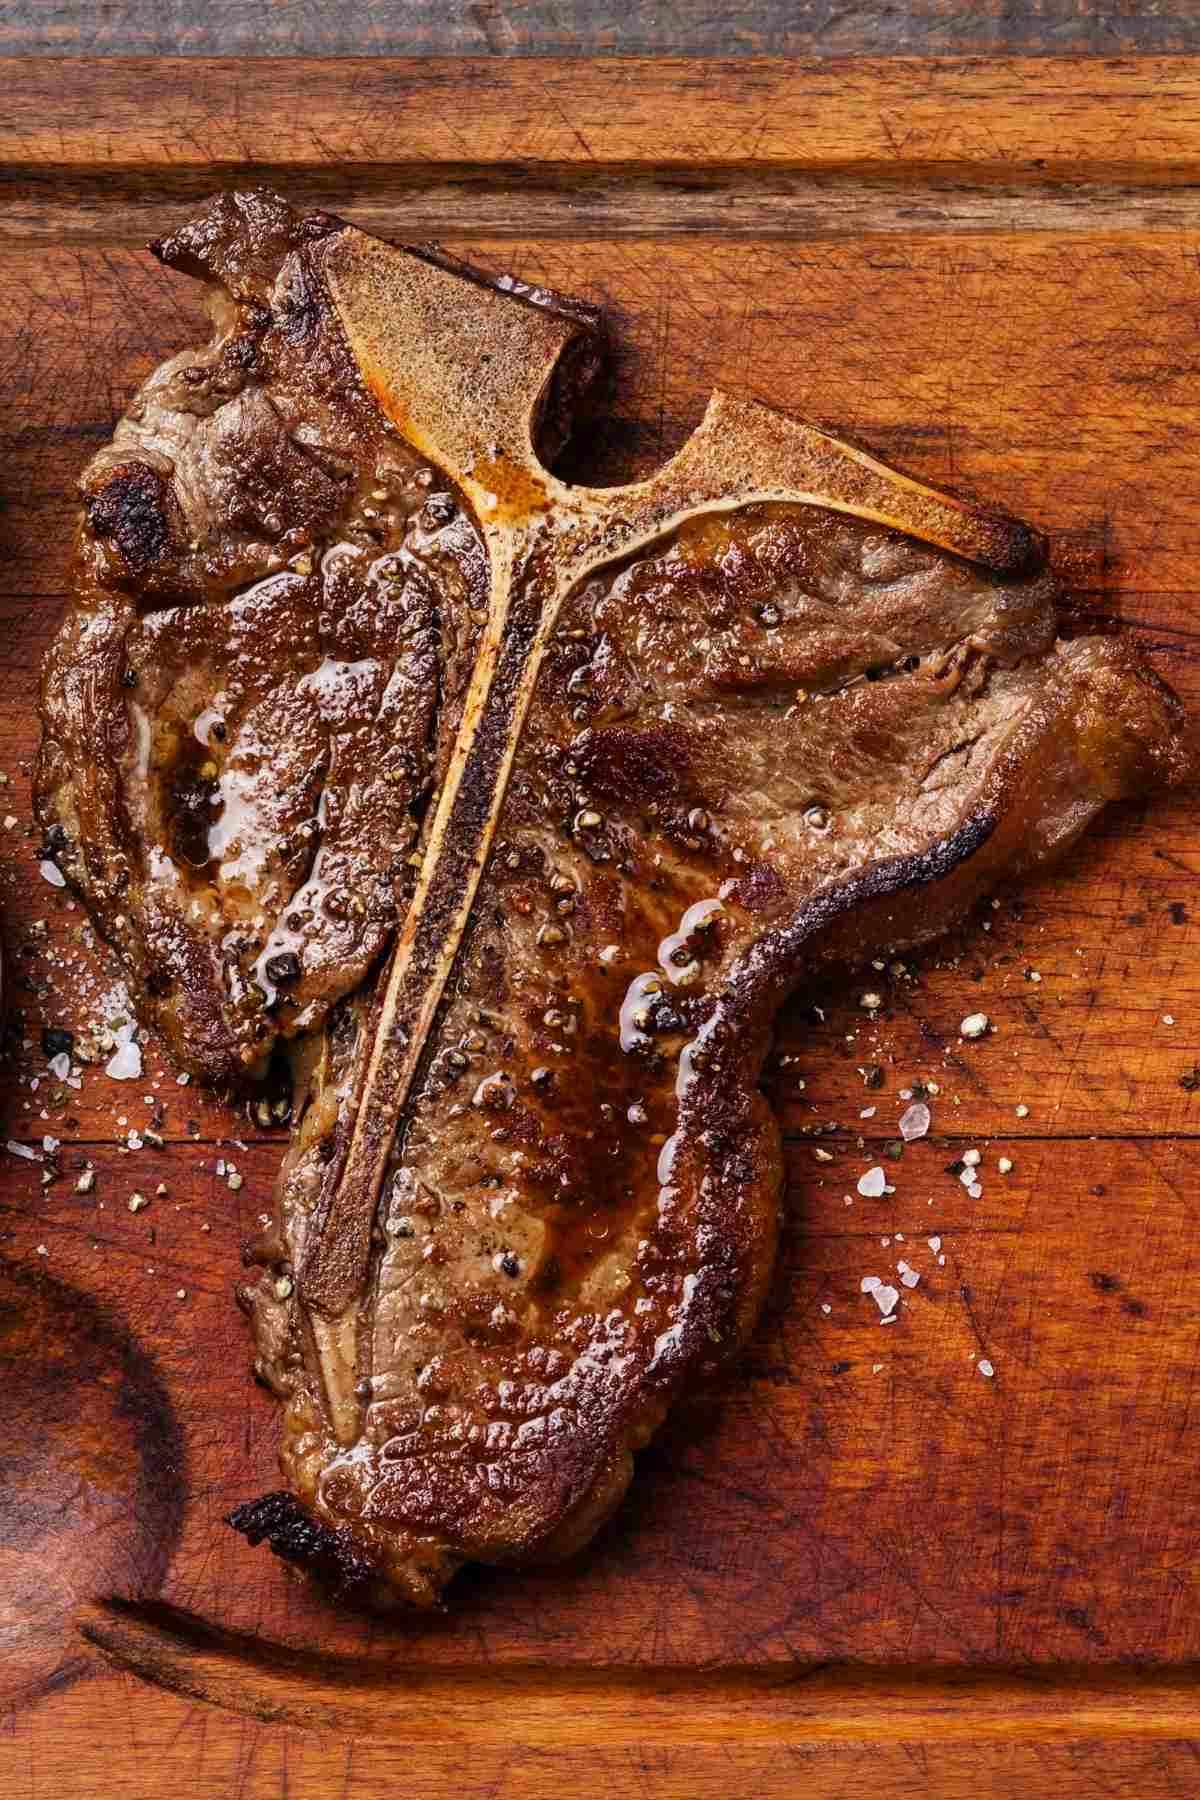 Serve this tender and flavorful Oven-Baked T-Bone Steak at your next celebration dinner! It’s seasoned with butter, olive oil, garlic, fresh rosemary, salt, and pepper and bakes beautifully.